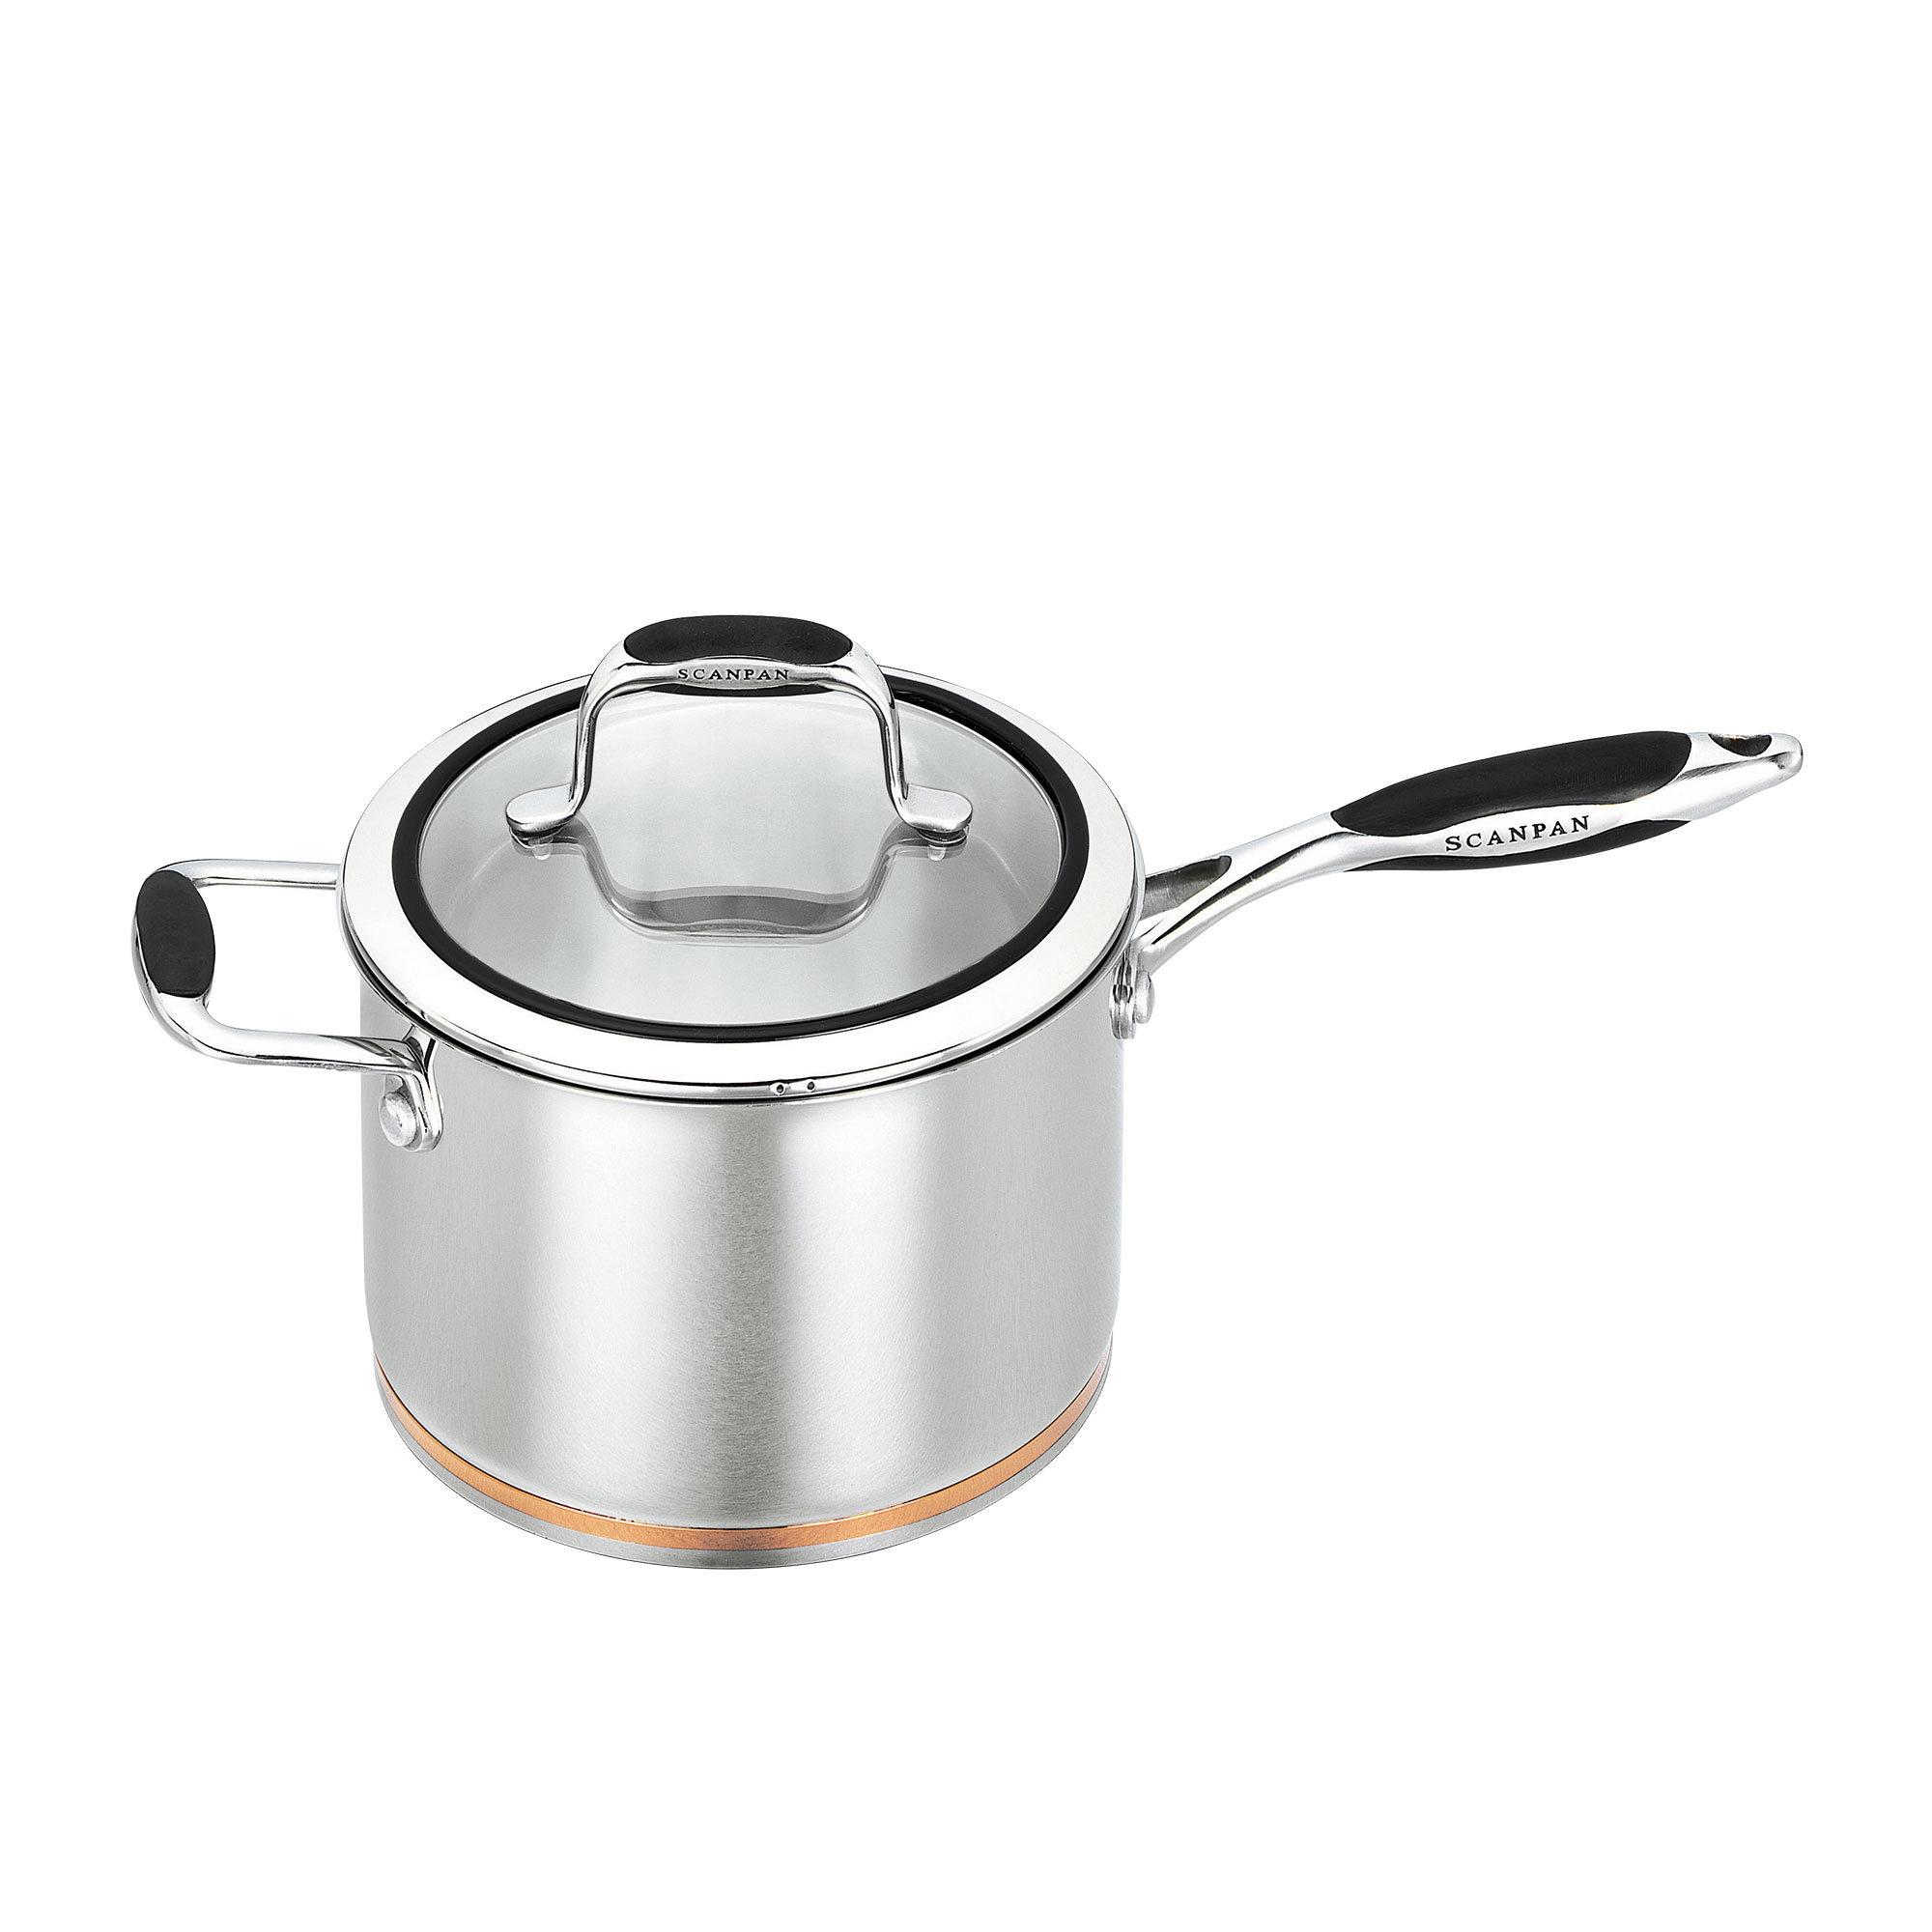 Scanpan Coppernox Stainless Steel Covered Saucepan 20cm - 3.5L Image 1